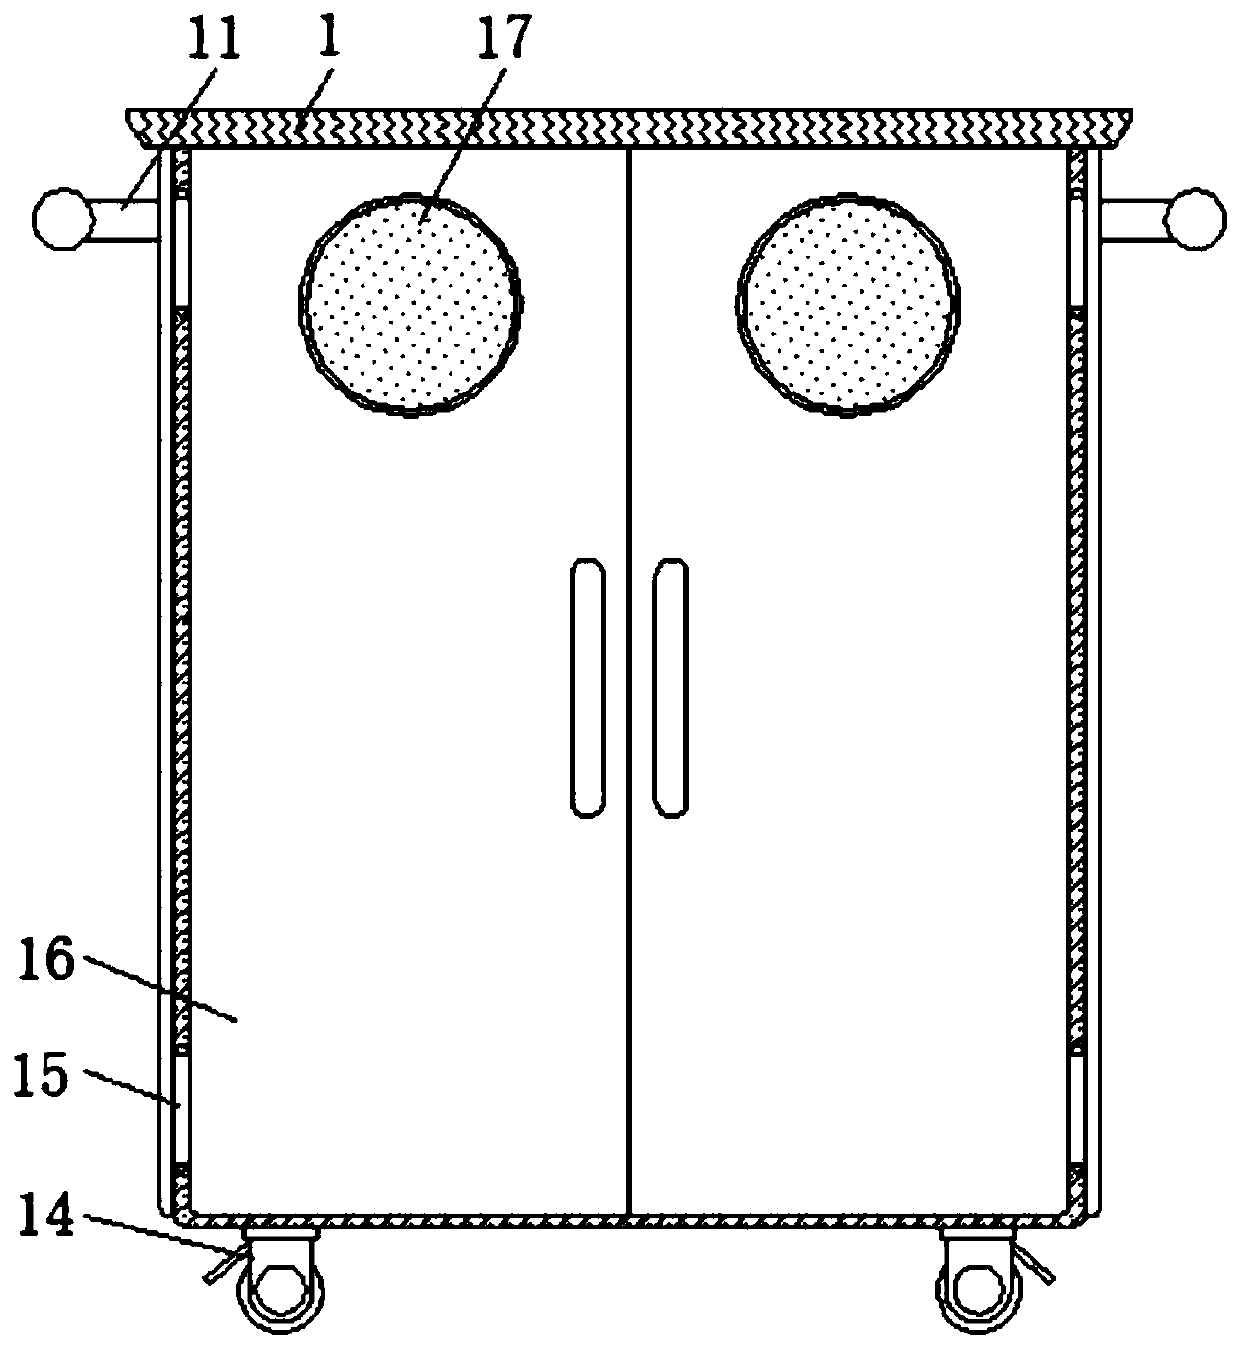 Classification device applicable to operating room nursing equipment